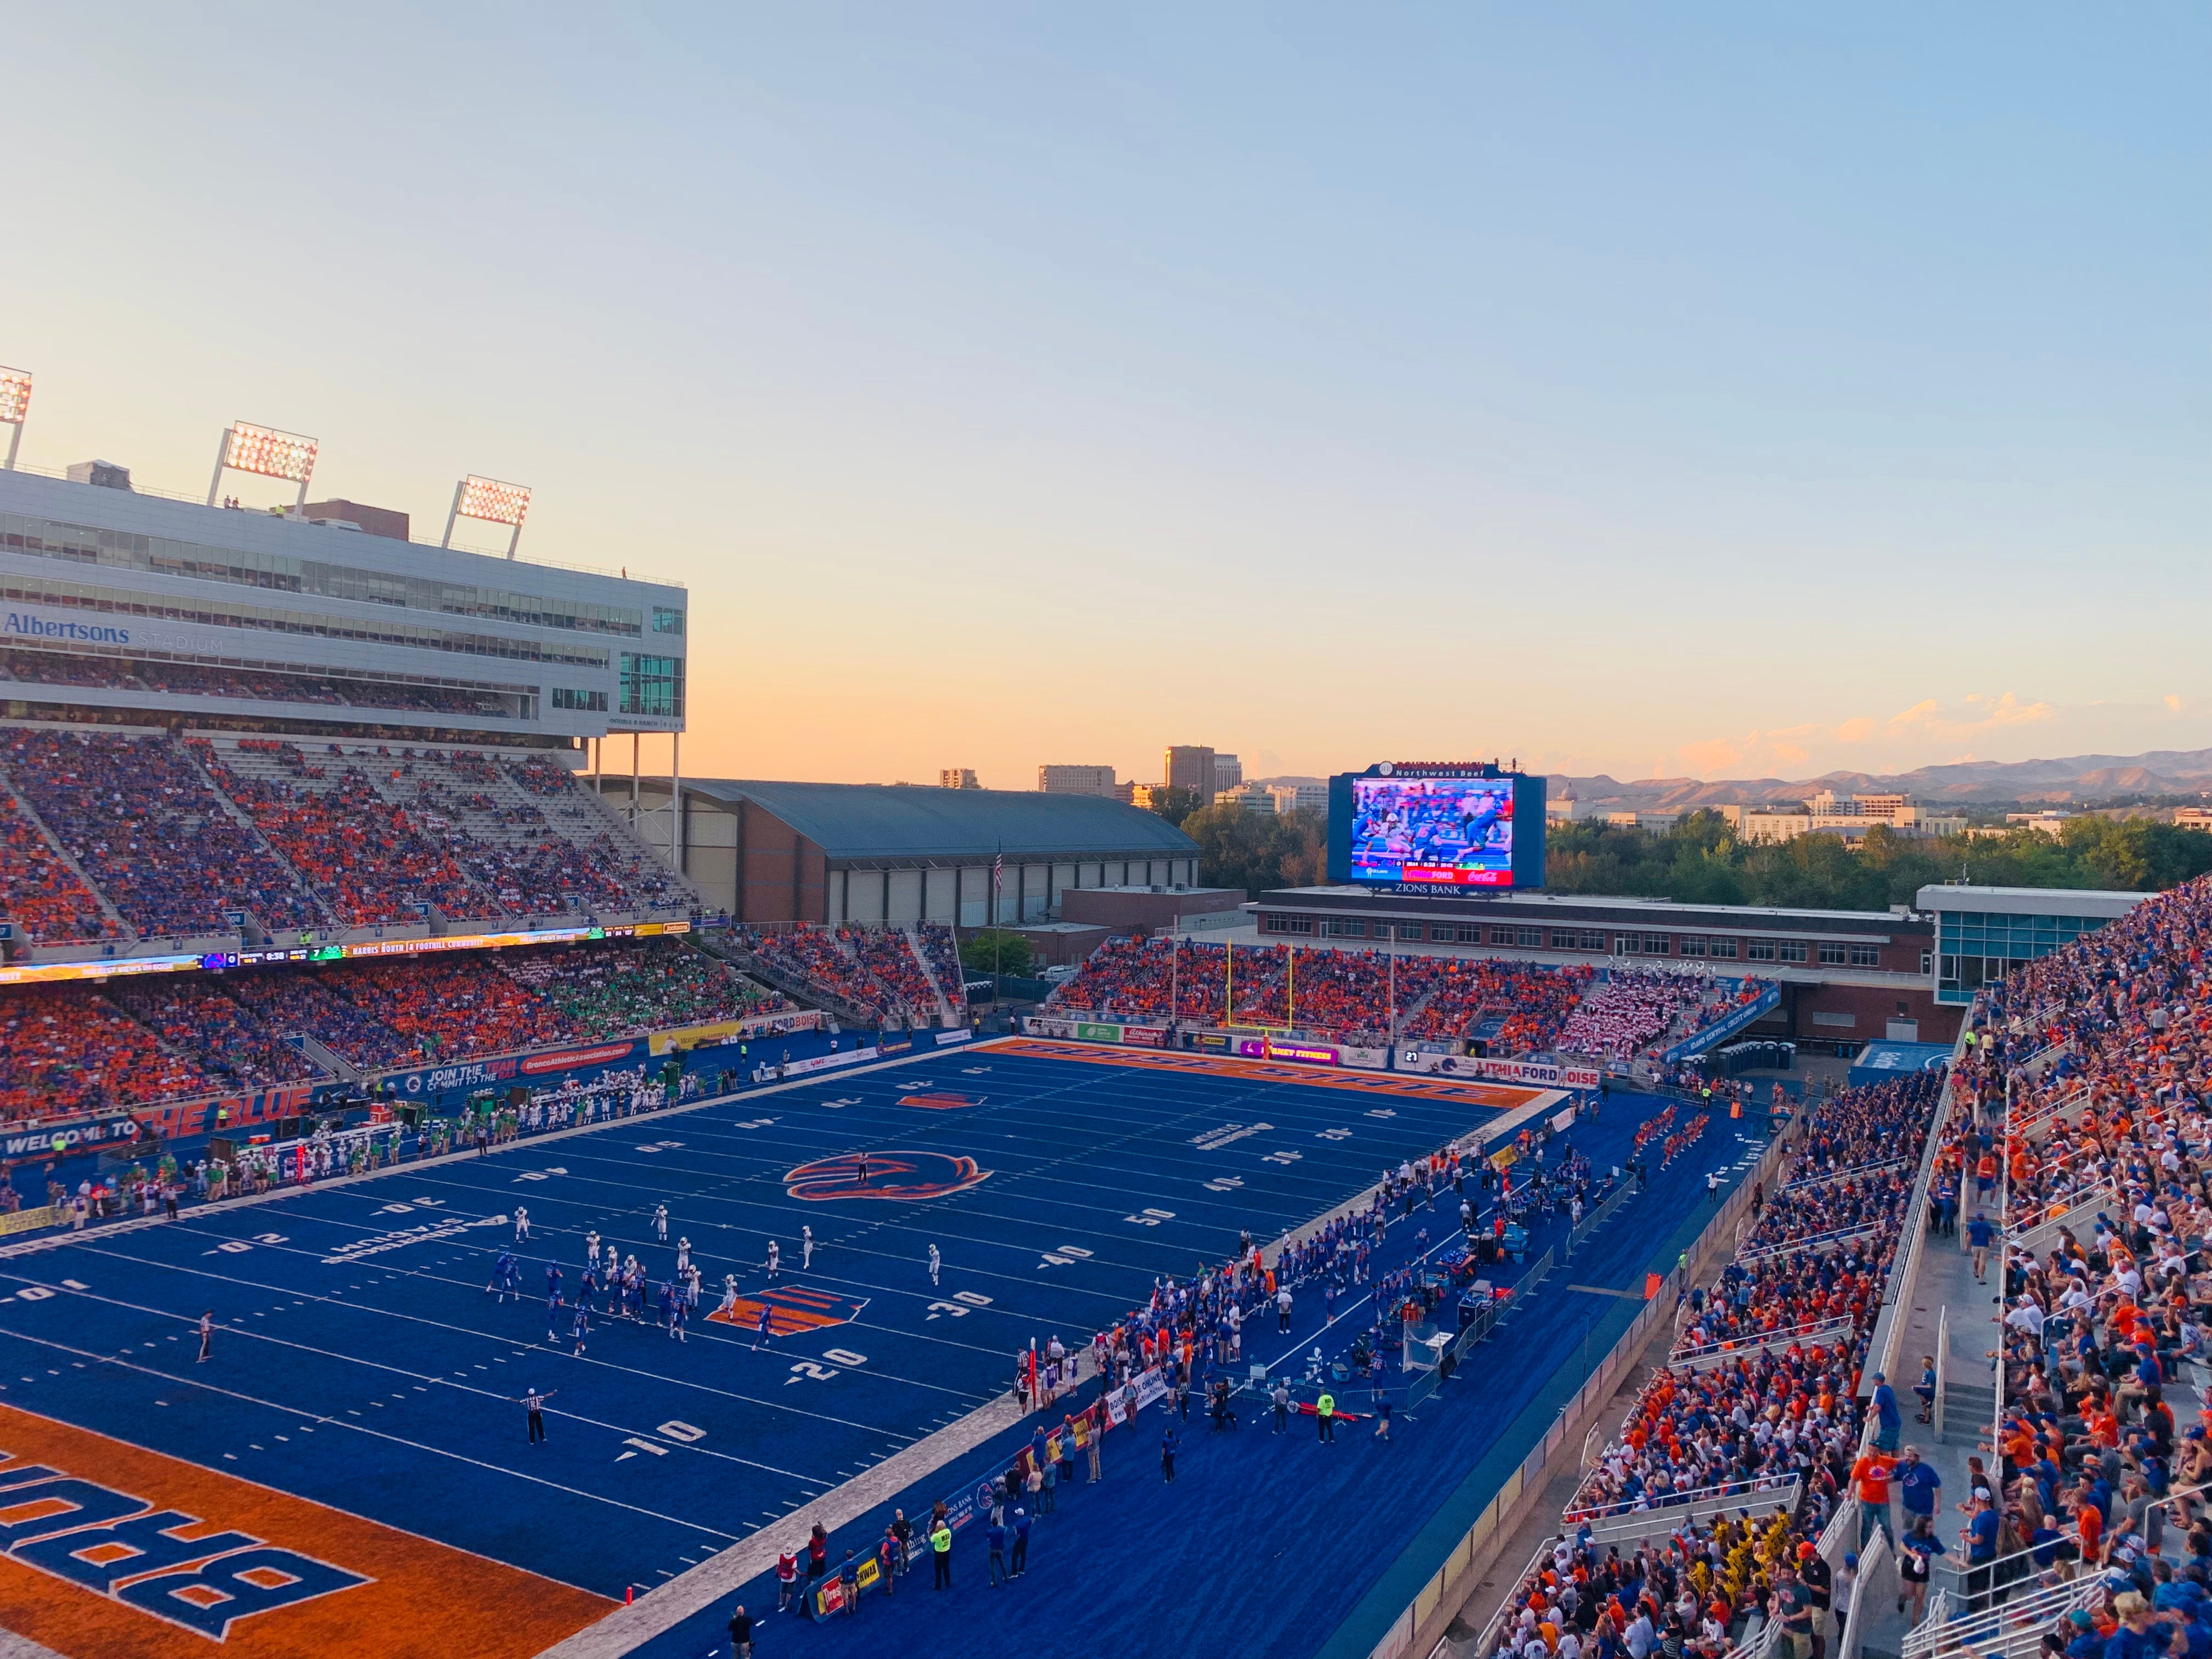 The Boise State Football stadium at sunset during game night with a crowd of people in the seats